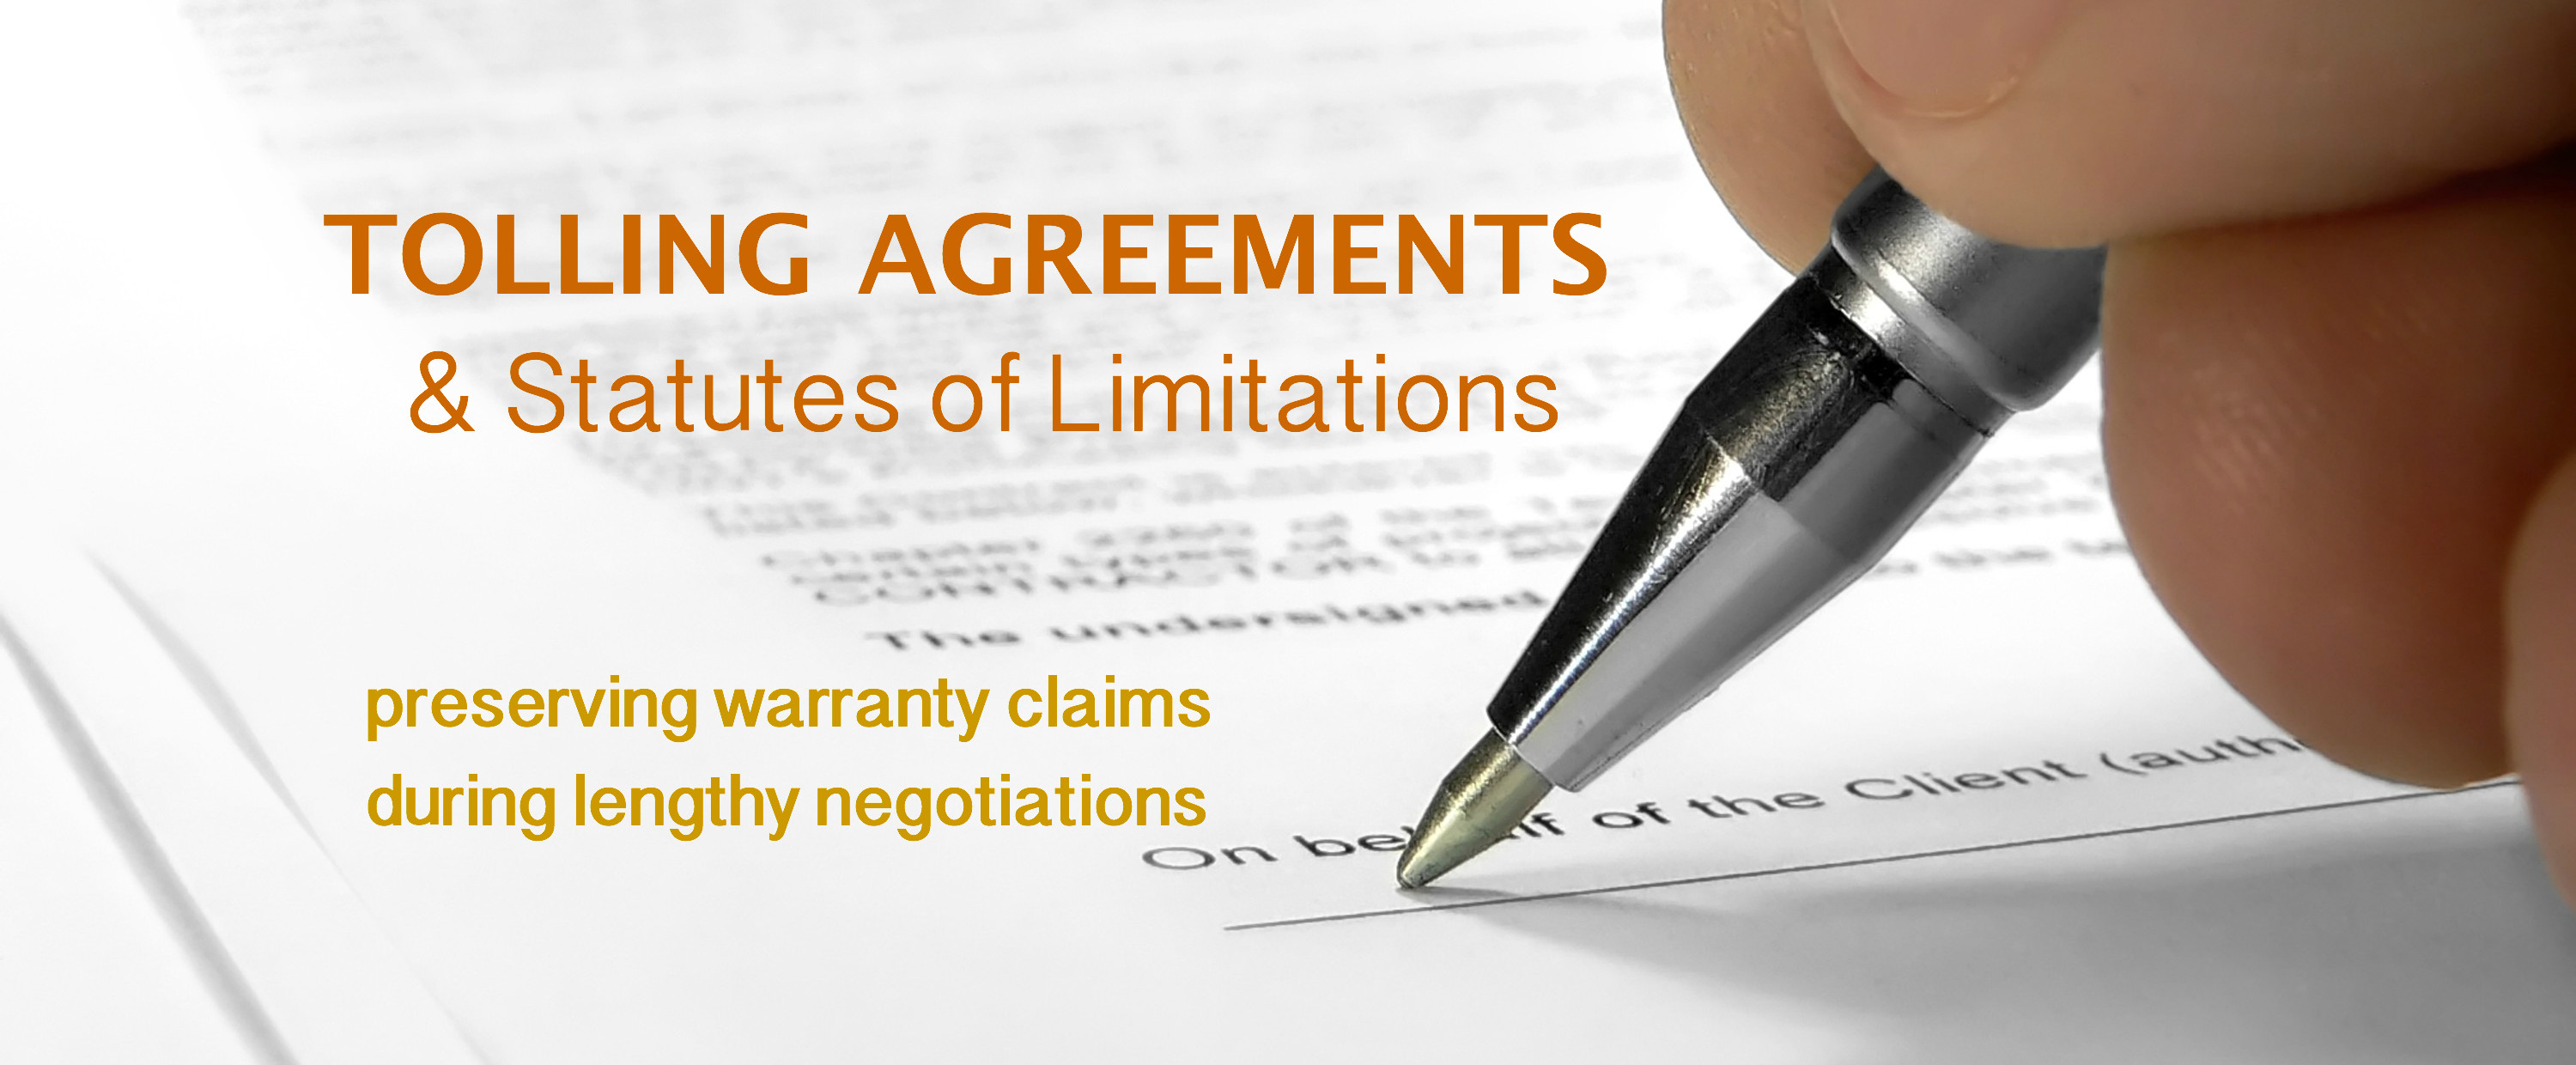 Tolling Agreements